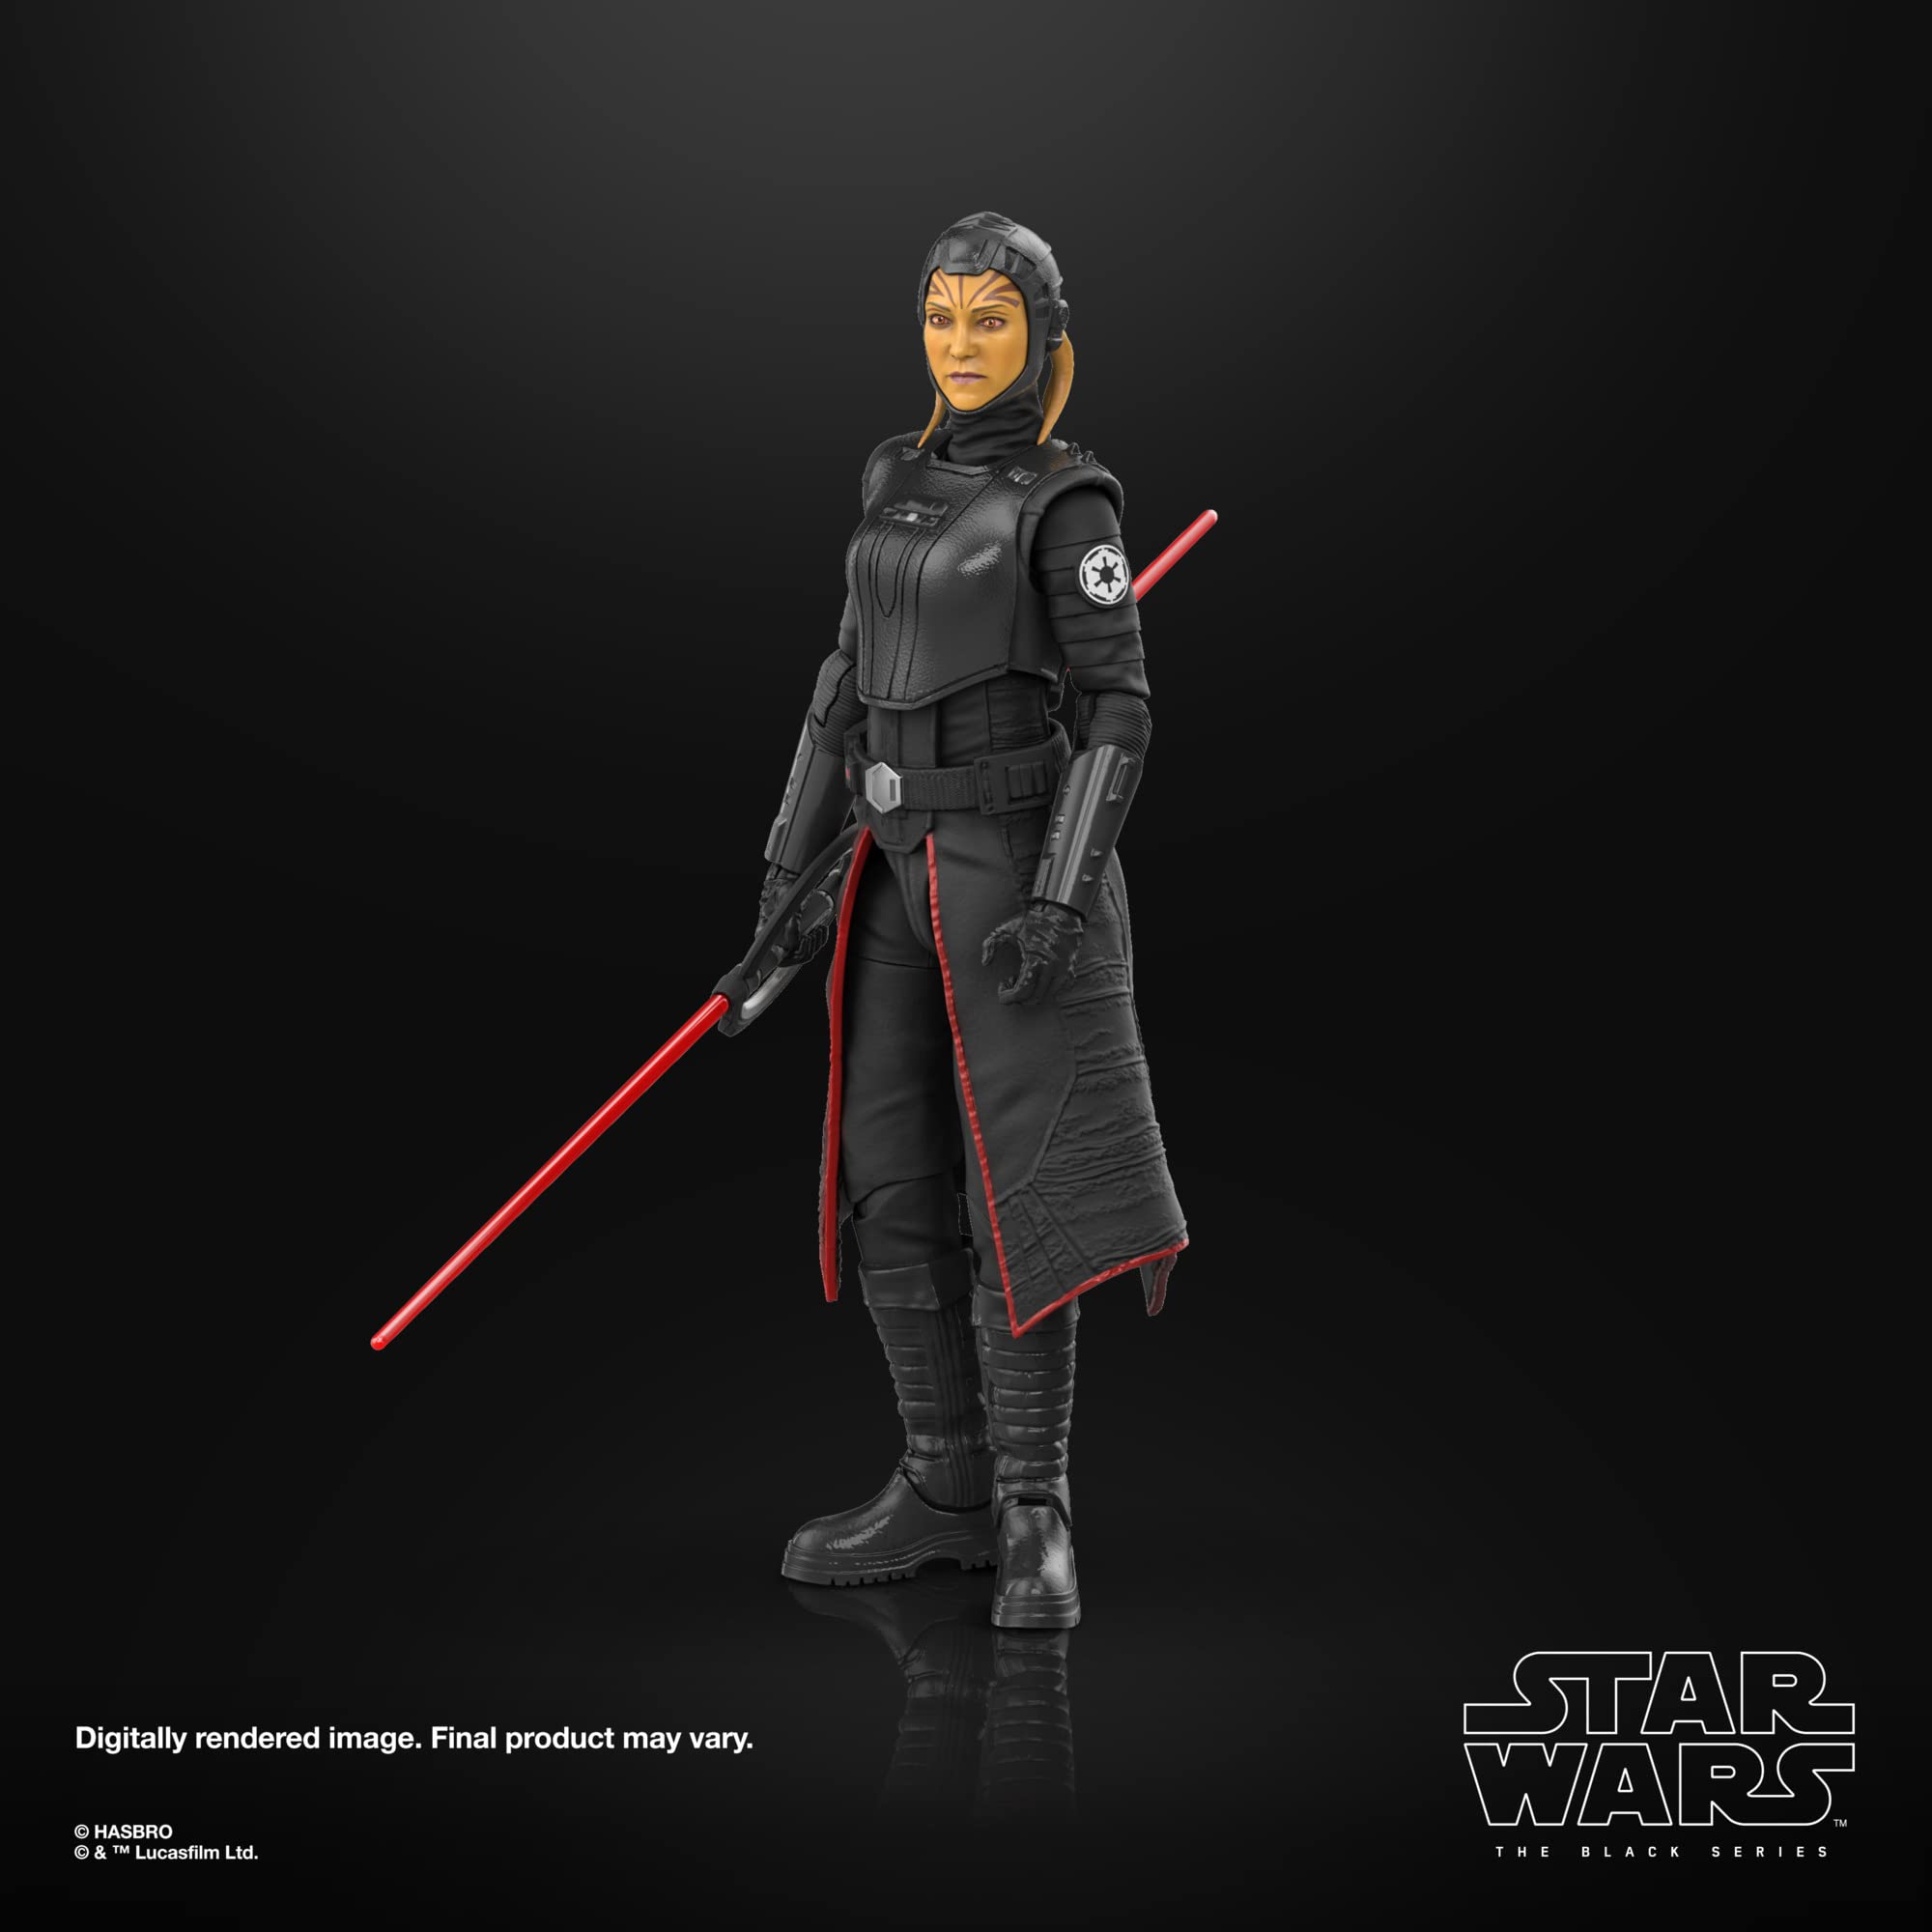 STAR WARS The Black Series Inquisitor – Fourth Sister, OBI-Wan Kenobi 6-Inch Collectible Action Figures, Ages 4 and Up, Multicolored (F7099)